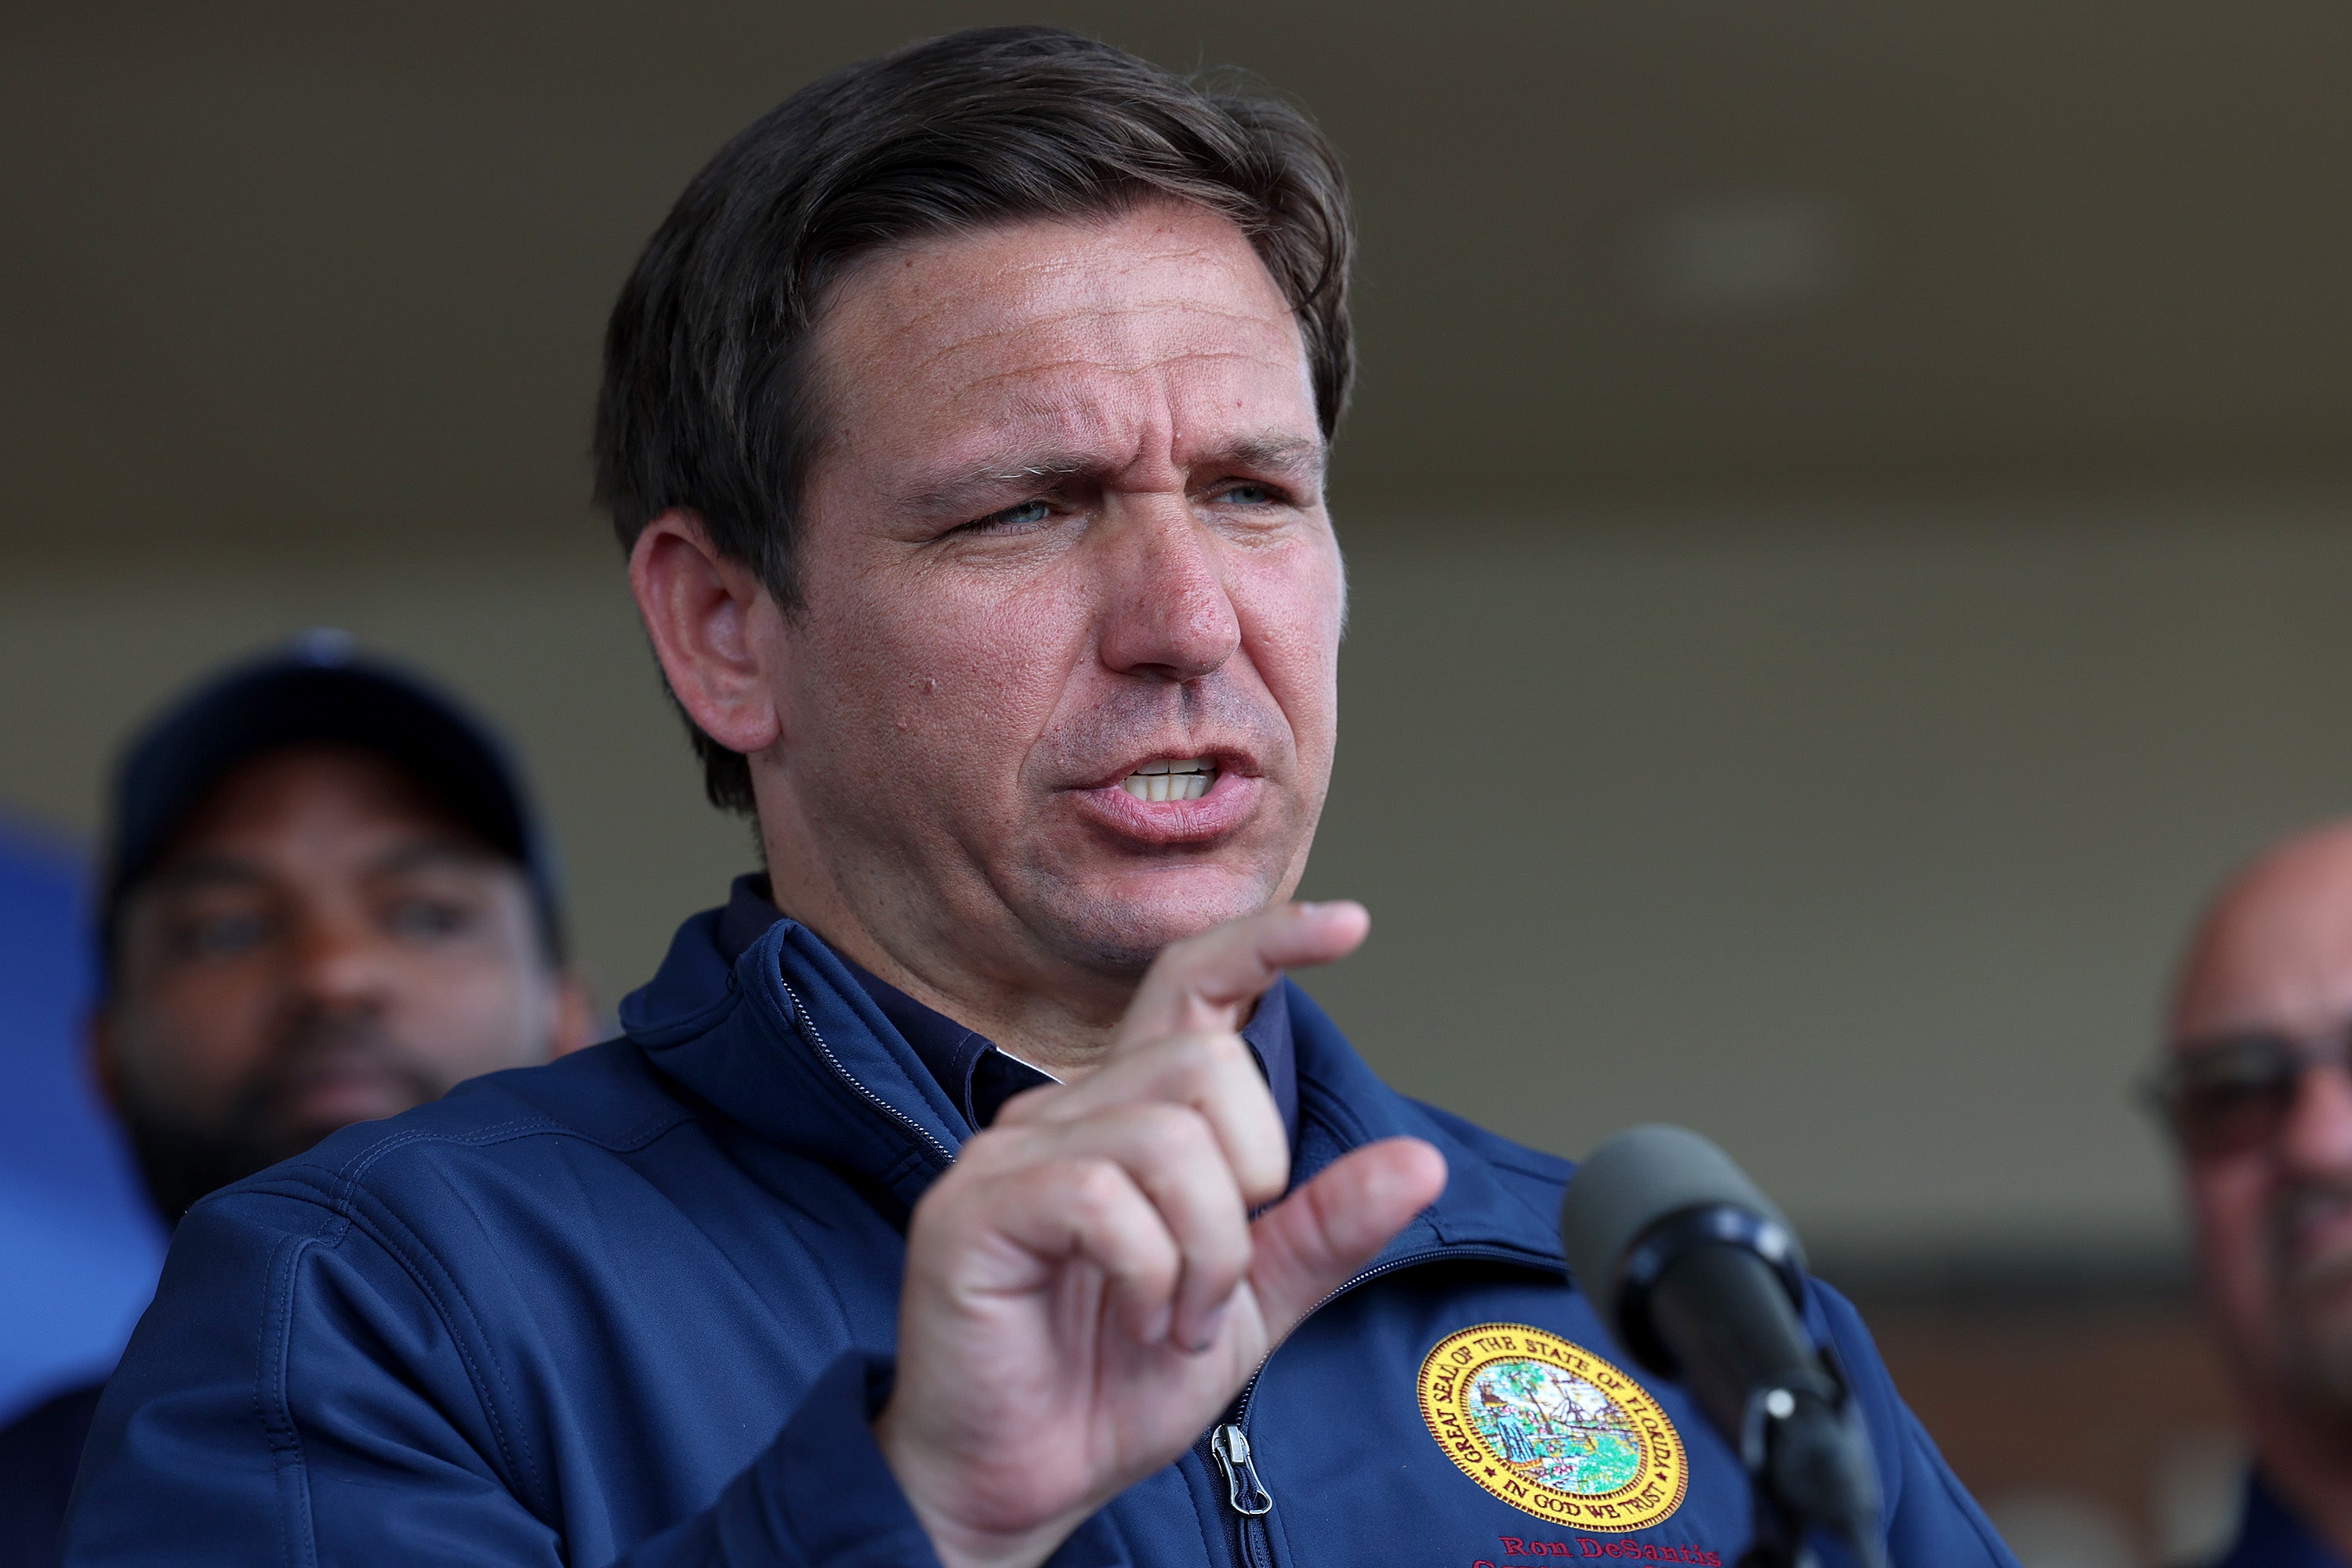 Florida Governor Ron DeSantis has put himself at forefront of recovery efforts